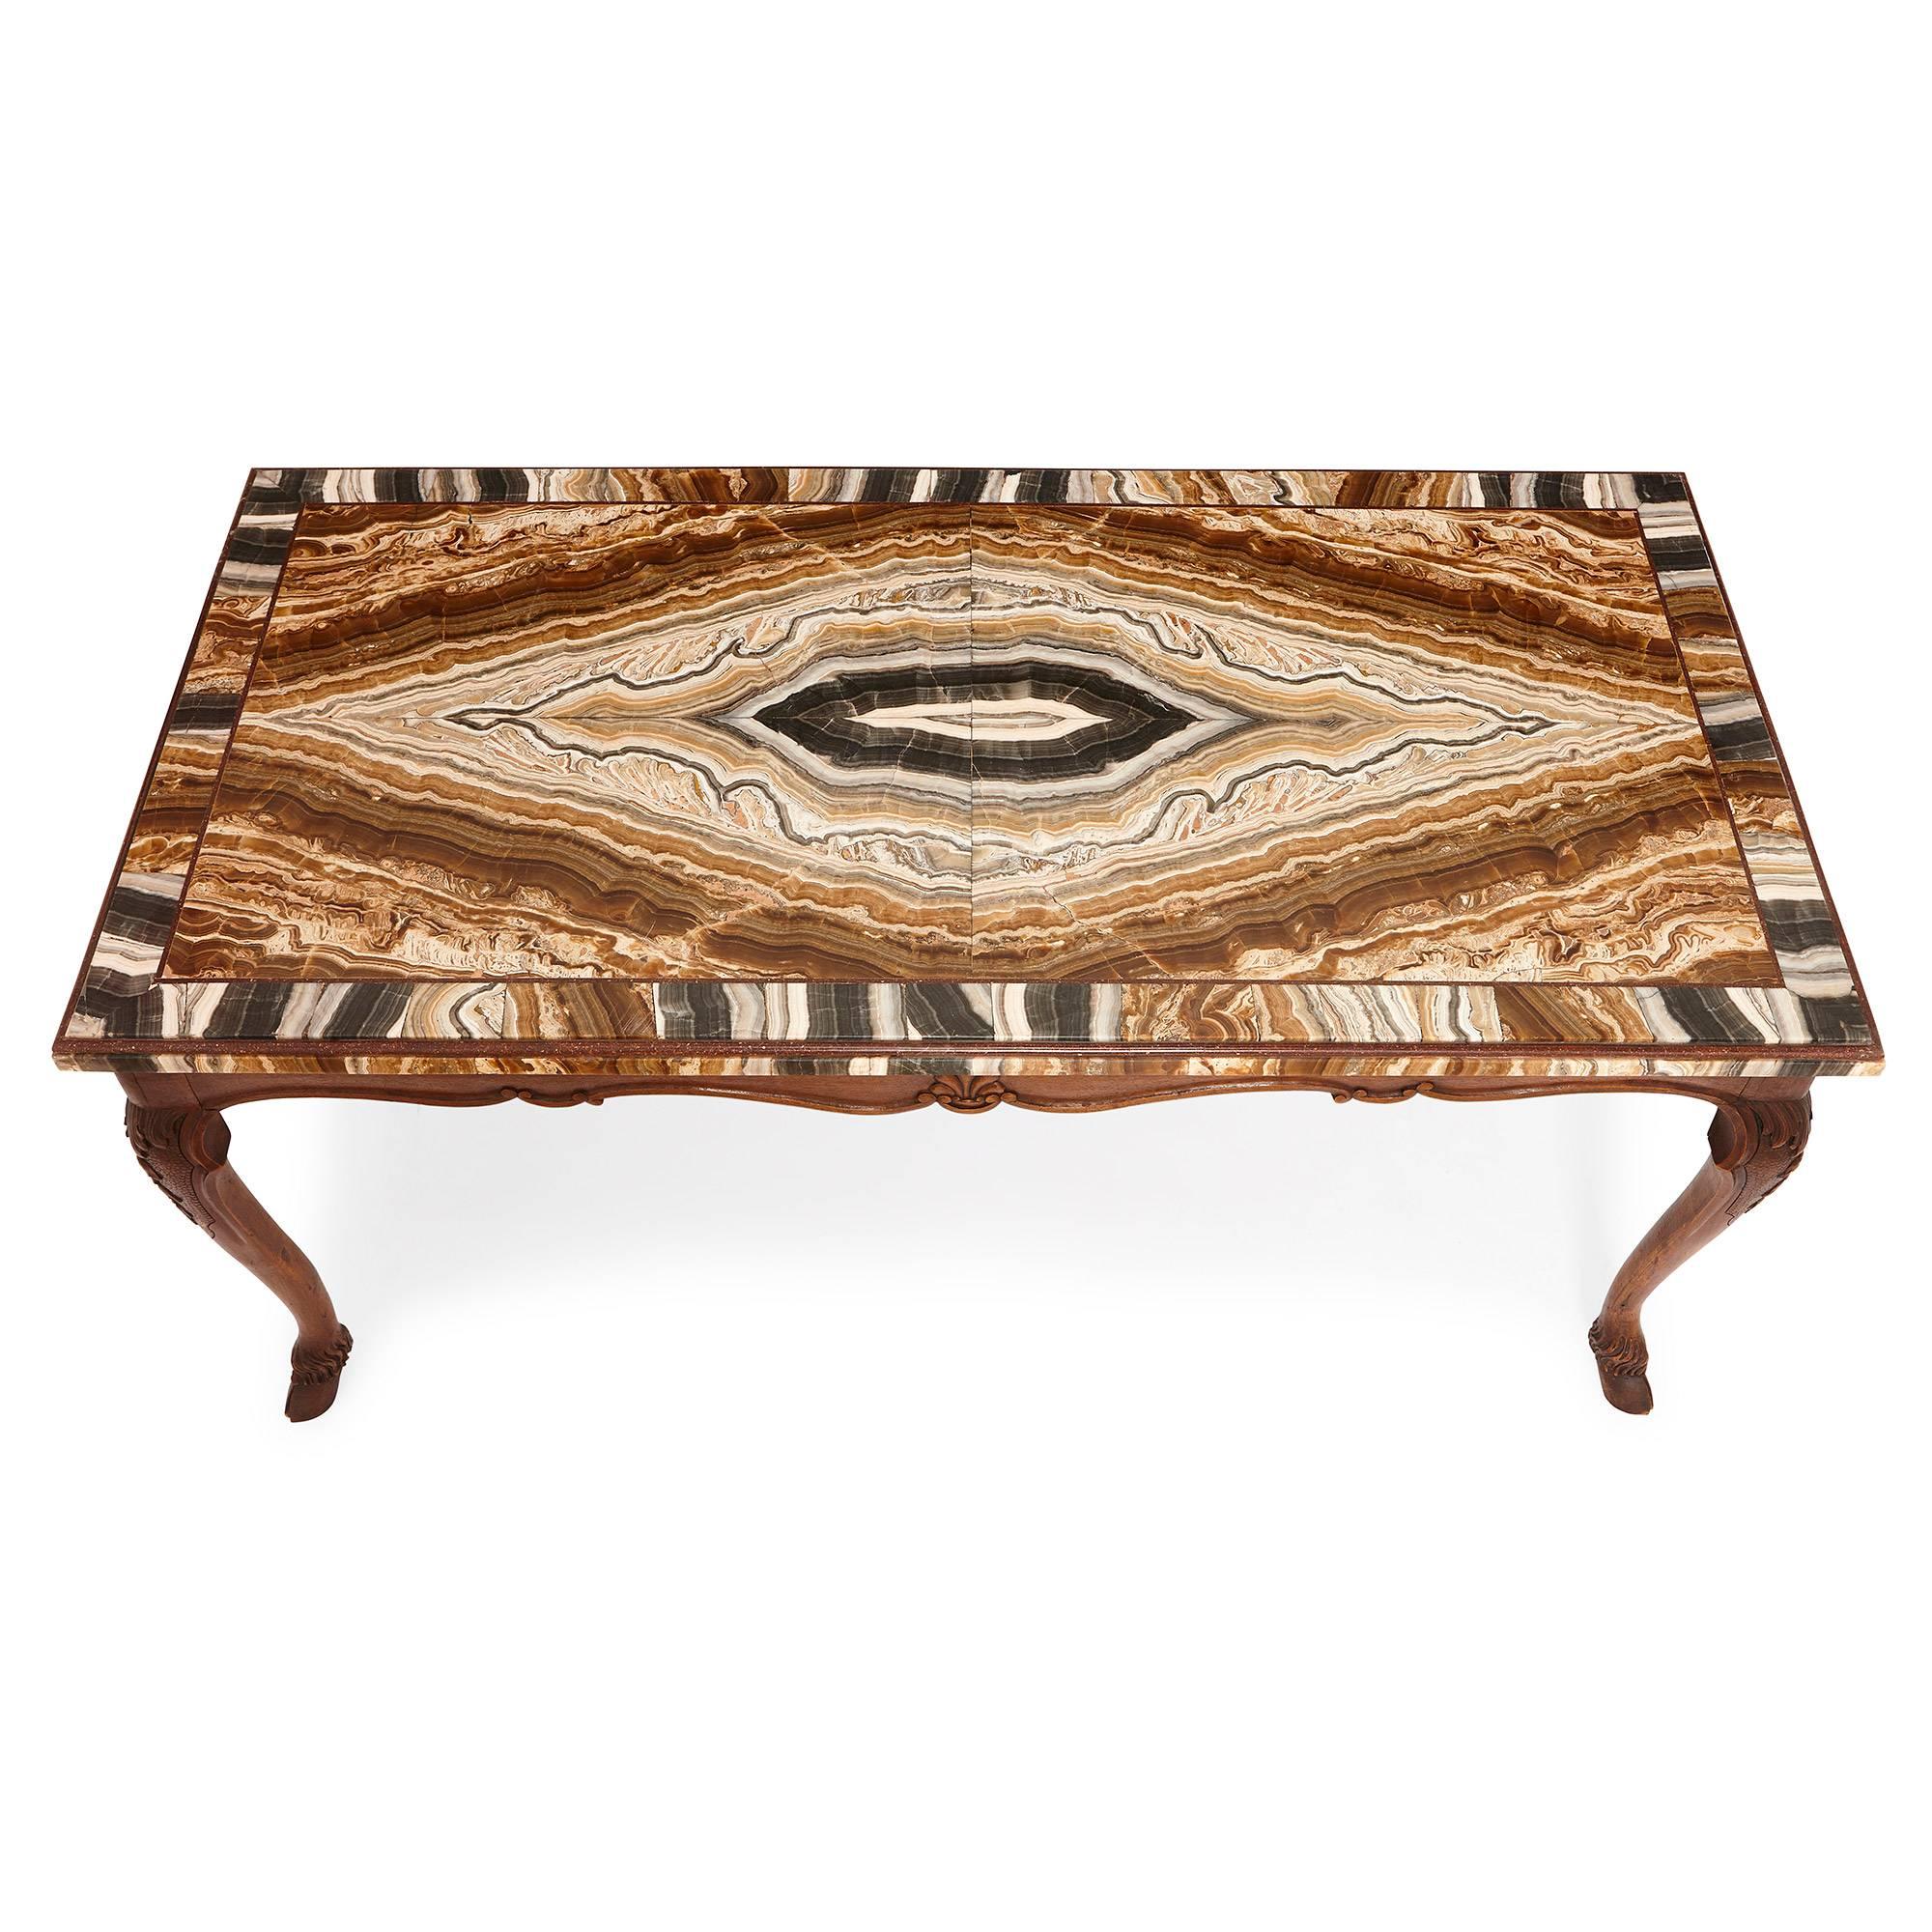 Rococo Antique 18th Century Coffee Table with Onyx and Porphyry Top For Sale